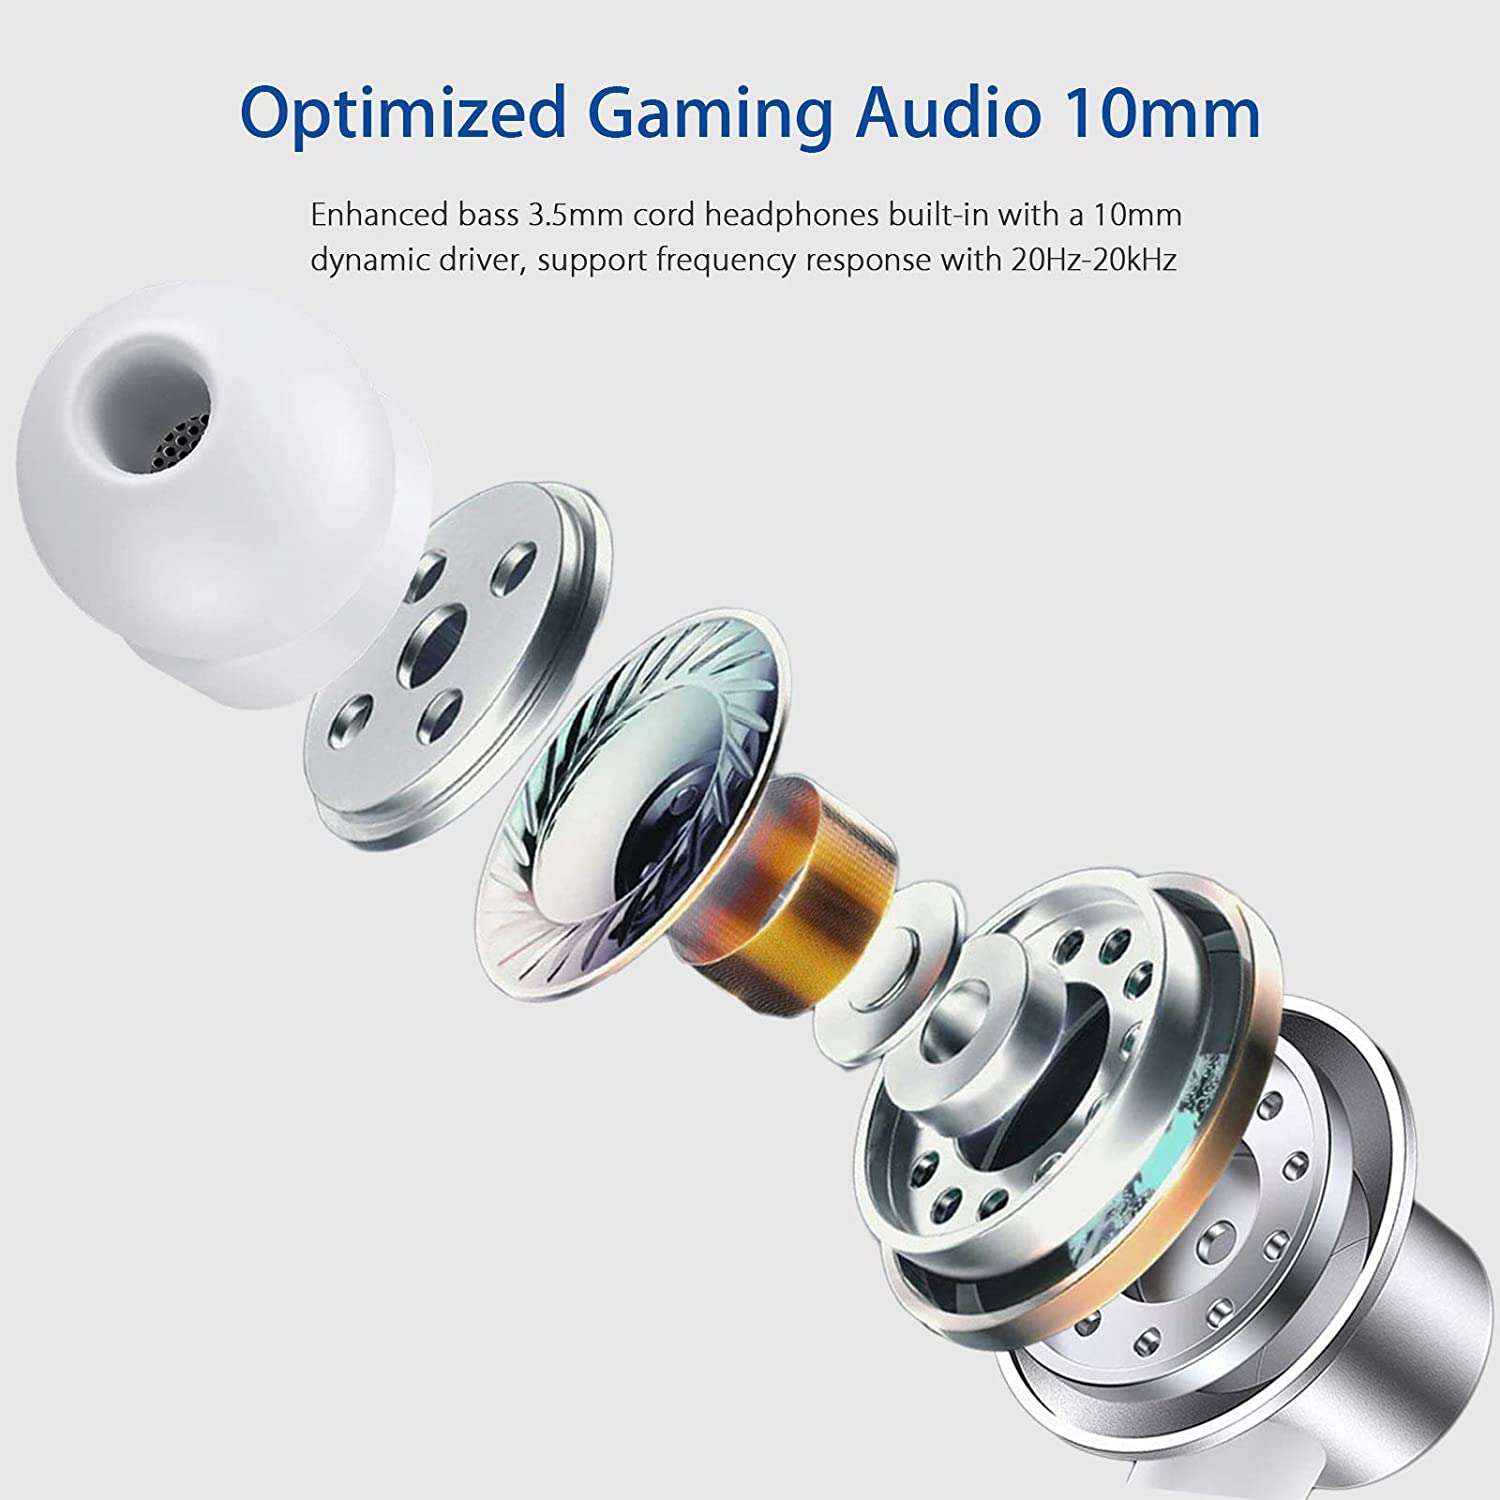 Built-in 10mm dynamic microphone for optimal gaming communication